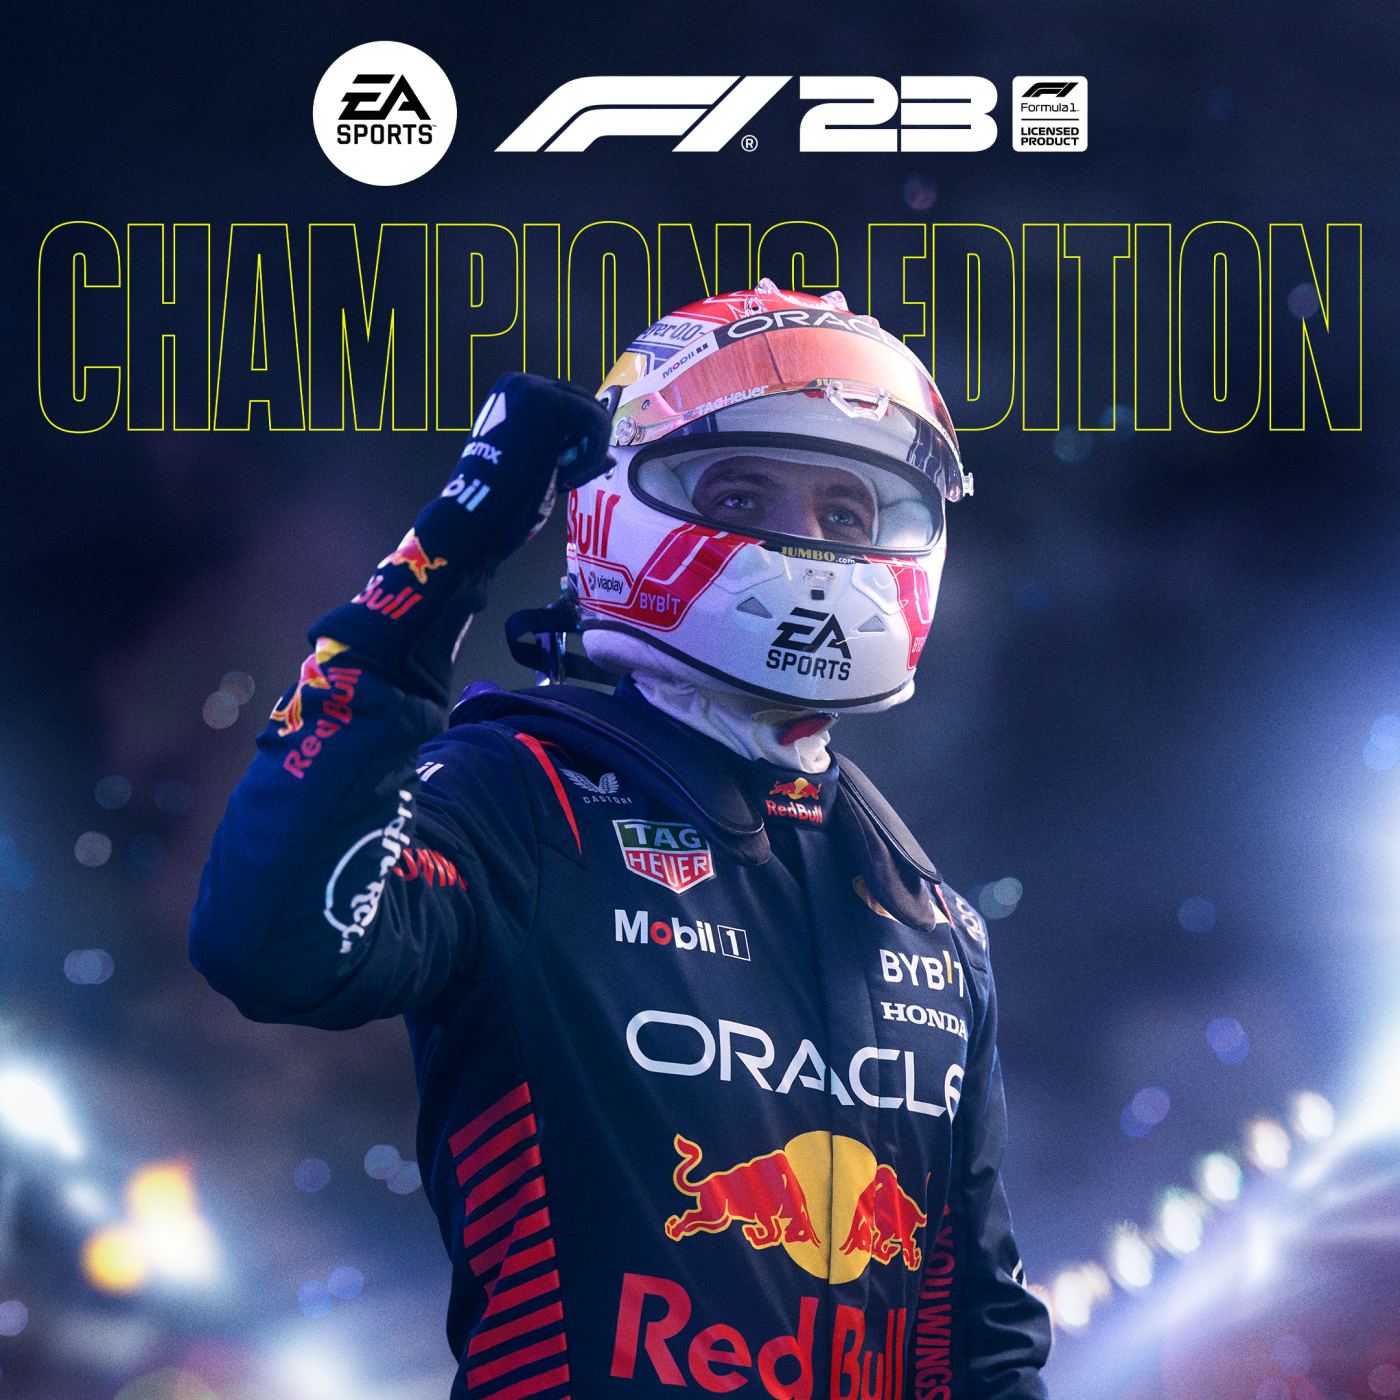 Sports the F1 Game for 23 Watch the Reveal EA Trailer New Video